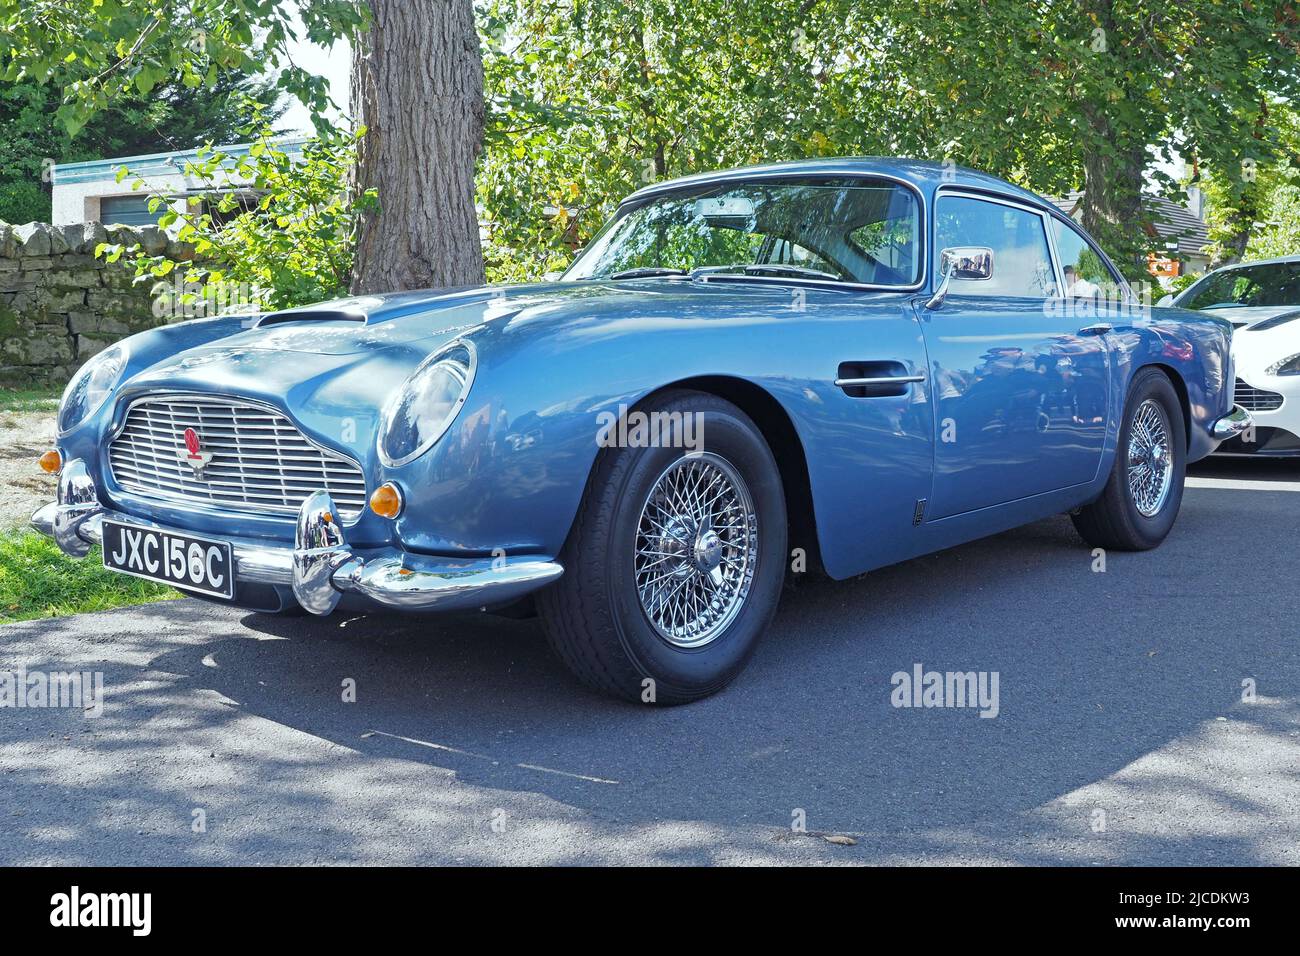 Aston Martin DB5, 4lt straight six, made in 1965, in `Caribbean Pearl` blue metallic, with wire wheels. Made famous by the James Bond movies. Stock Photo